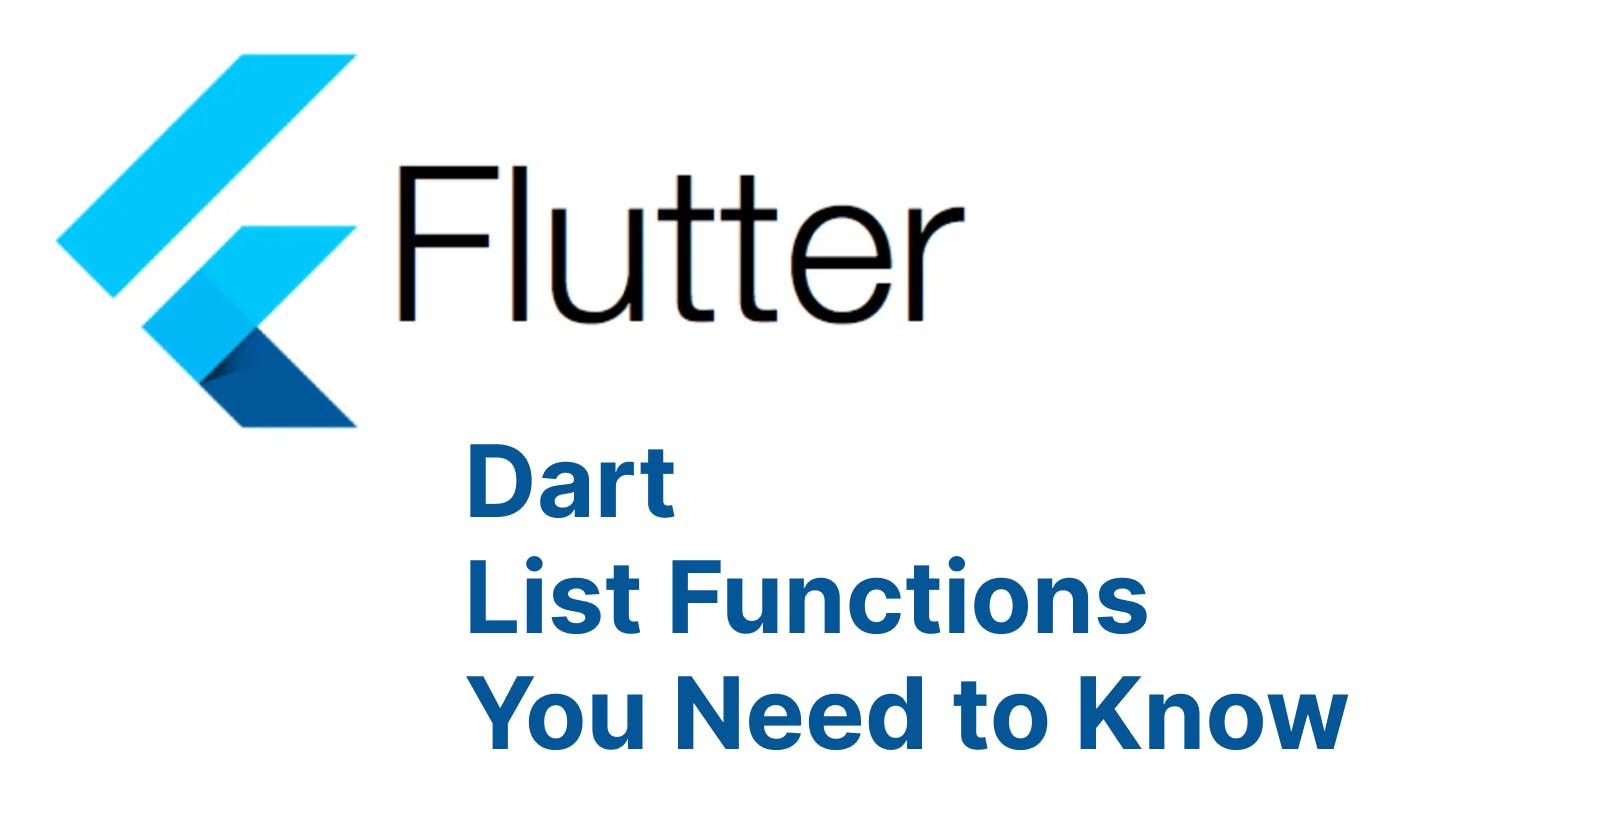 Dart List Functions You Need to Know